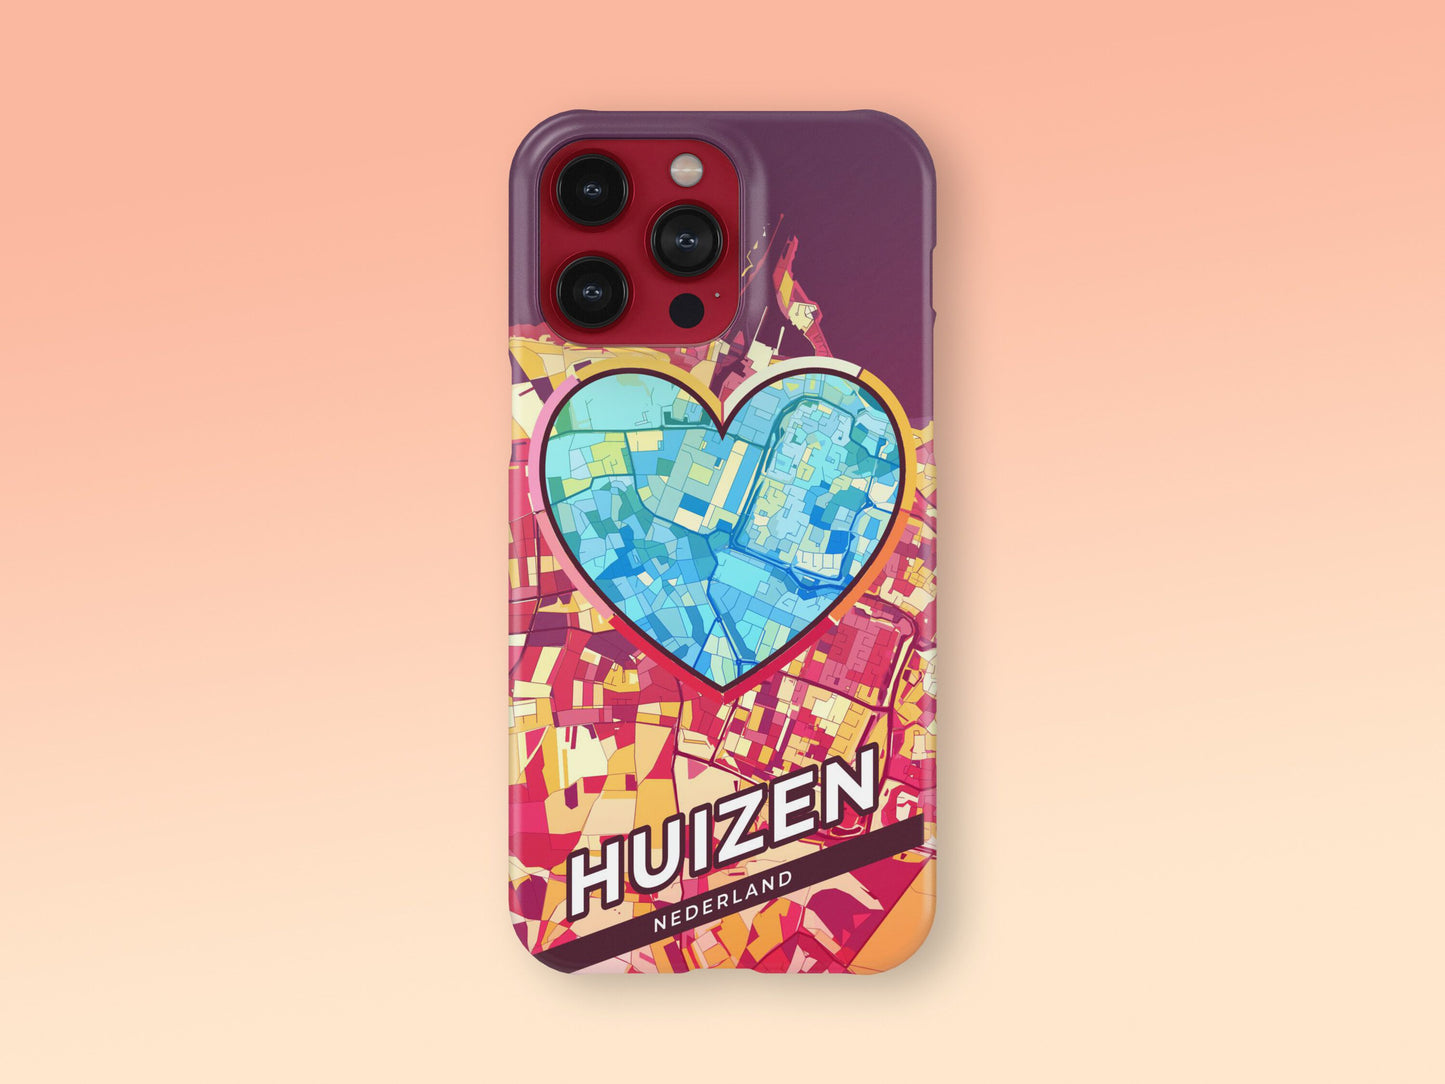 Huizen Netherlands slim phone case with colorful icon. Birthday, wedding or housewarming gift. Couple match cases. 2